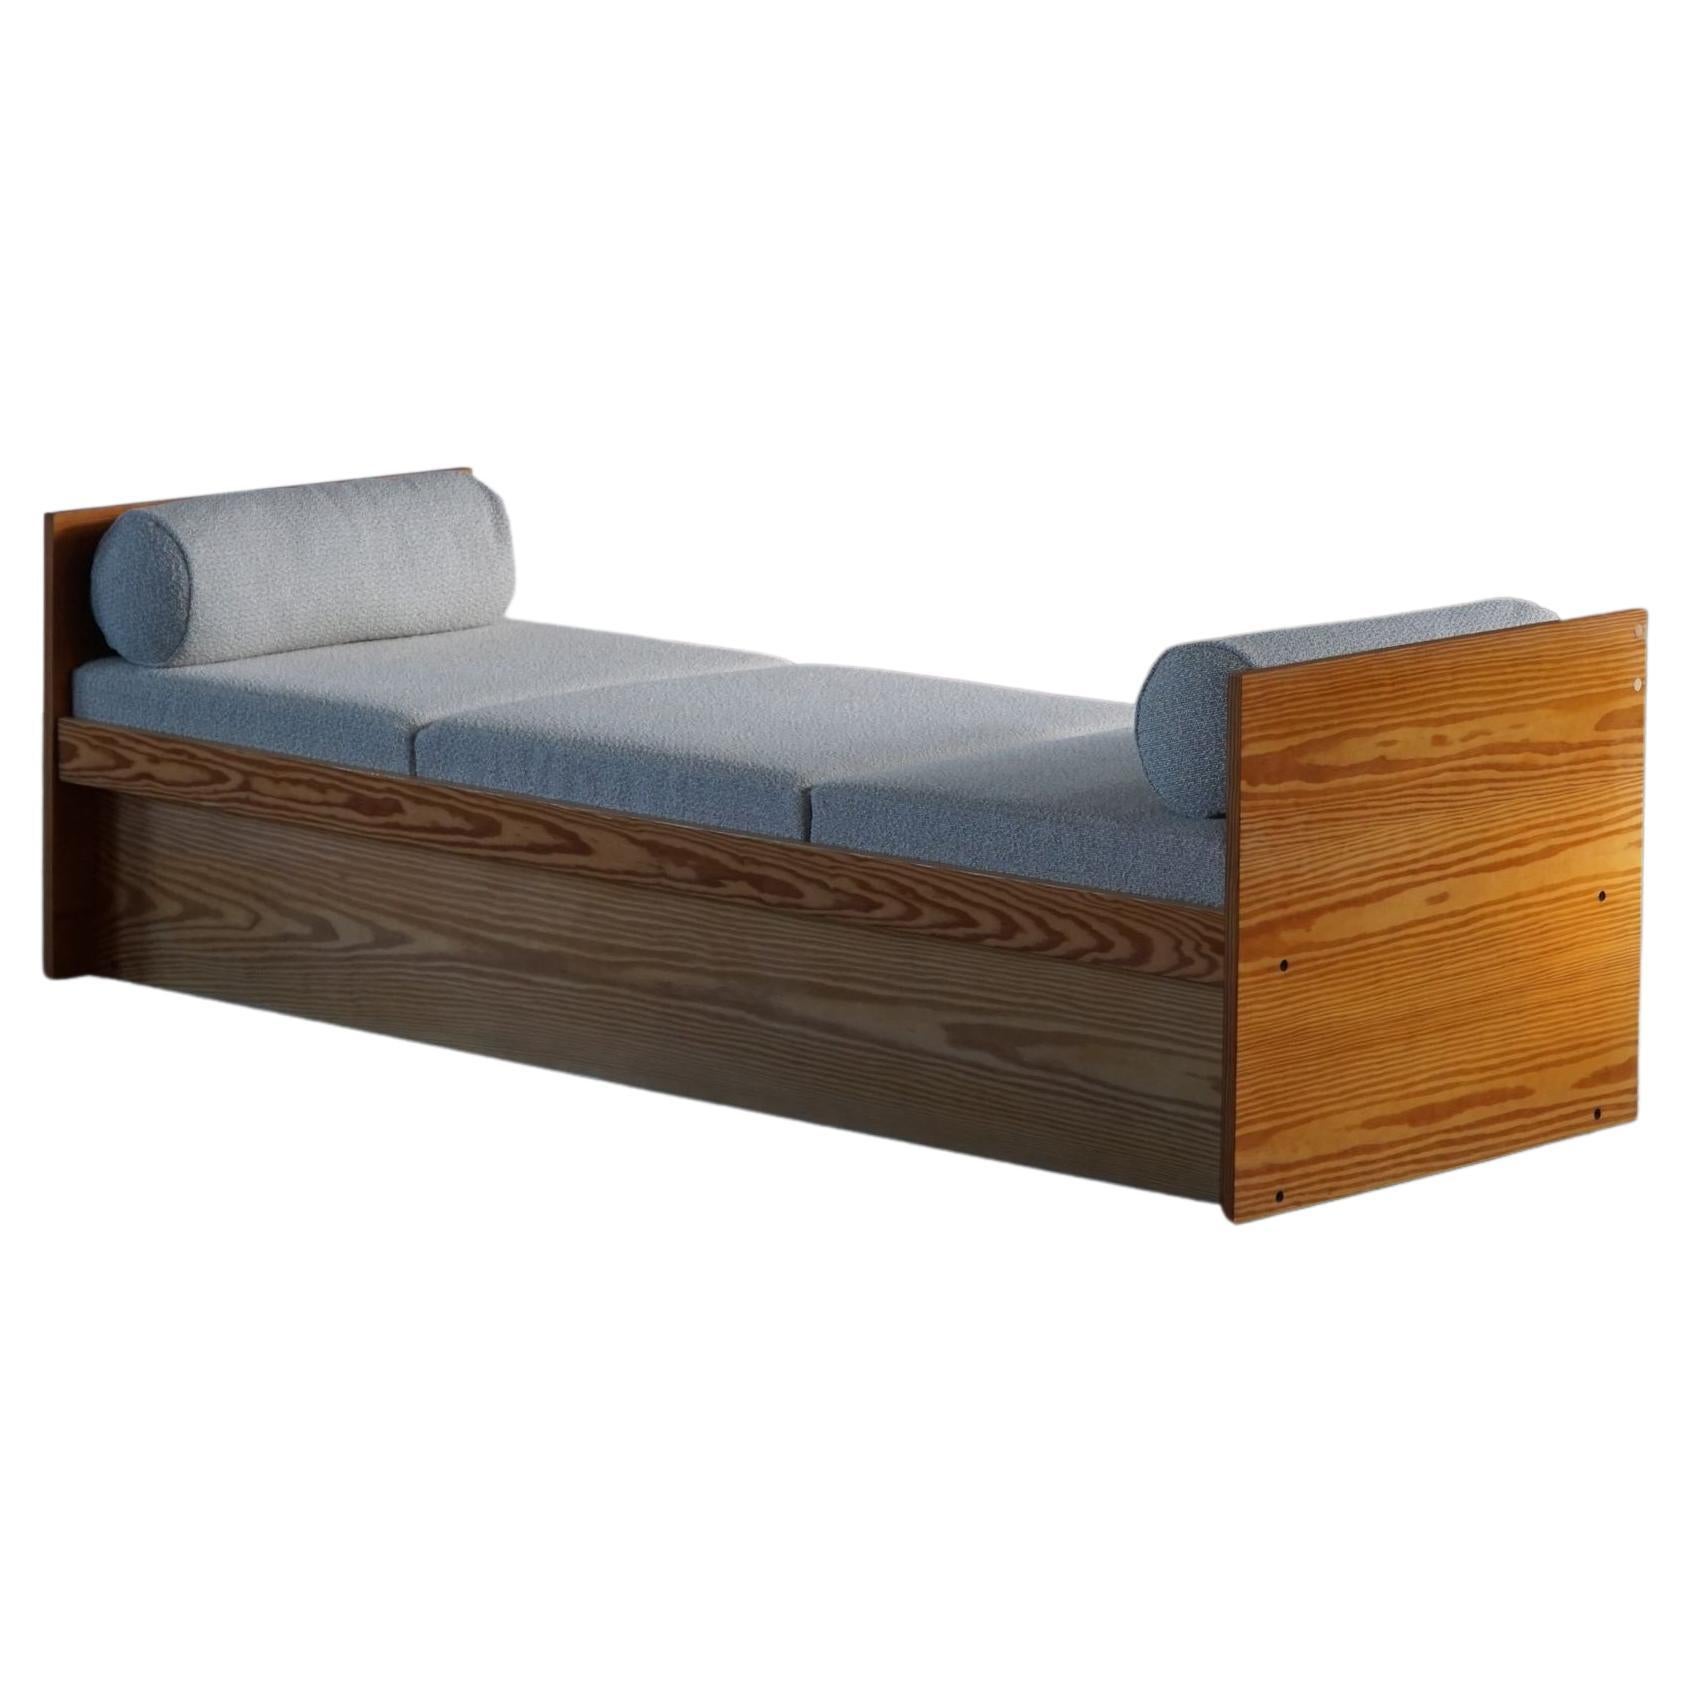 Swedish Mid-Century Modern Daybed, Reupholstered in Wool, Made in Pine, 1970s